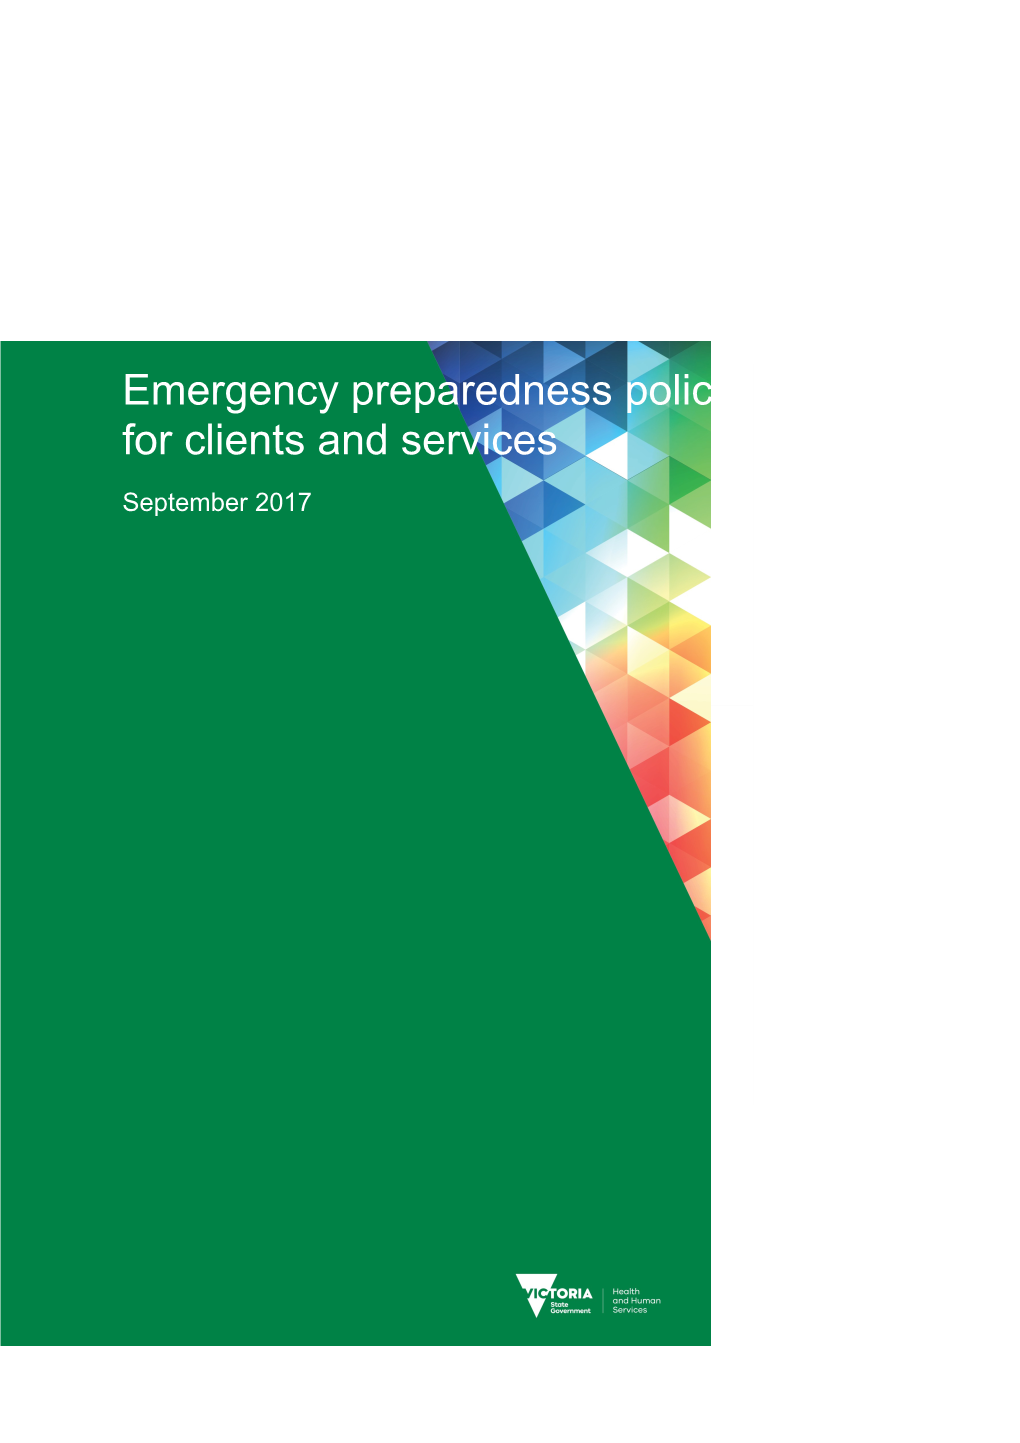 Emergency Preparedness Policy for Clients and Services